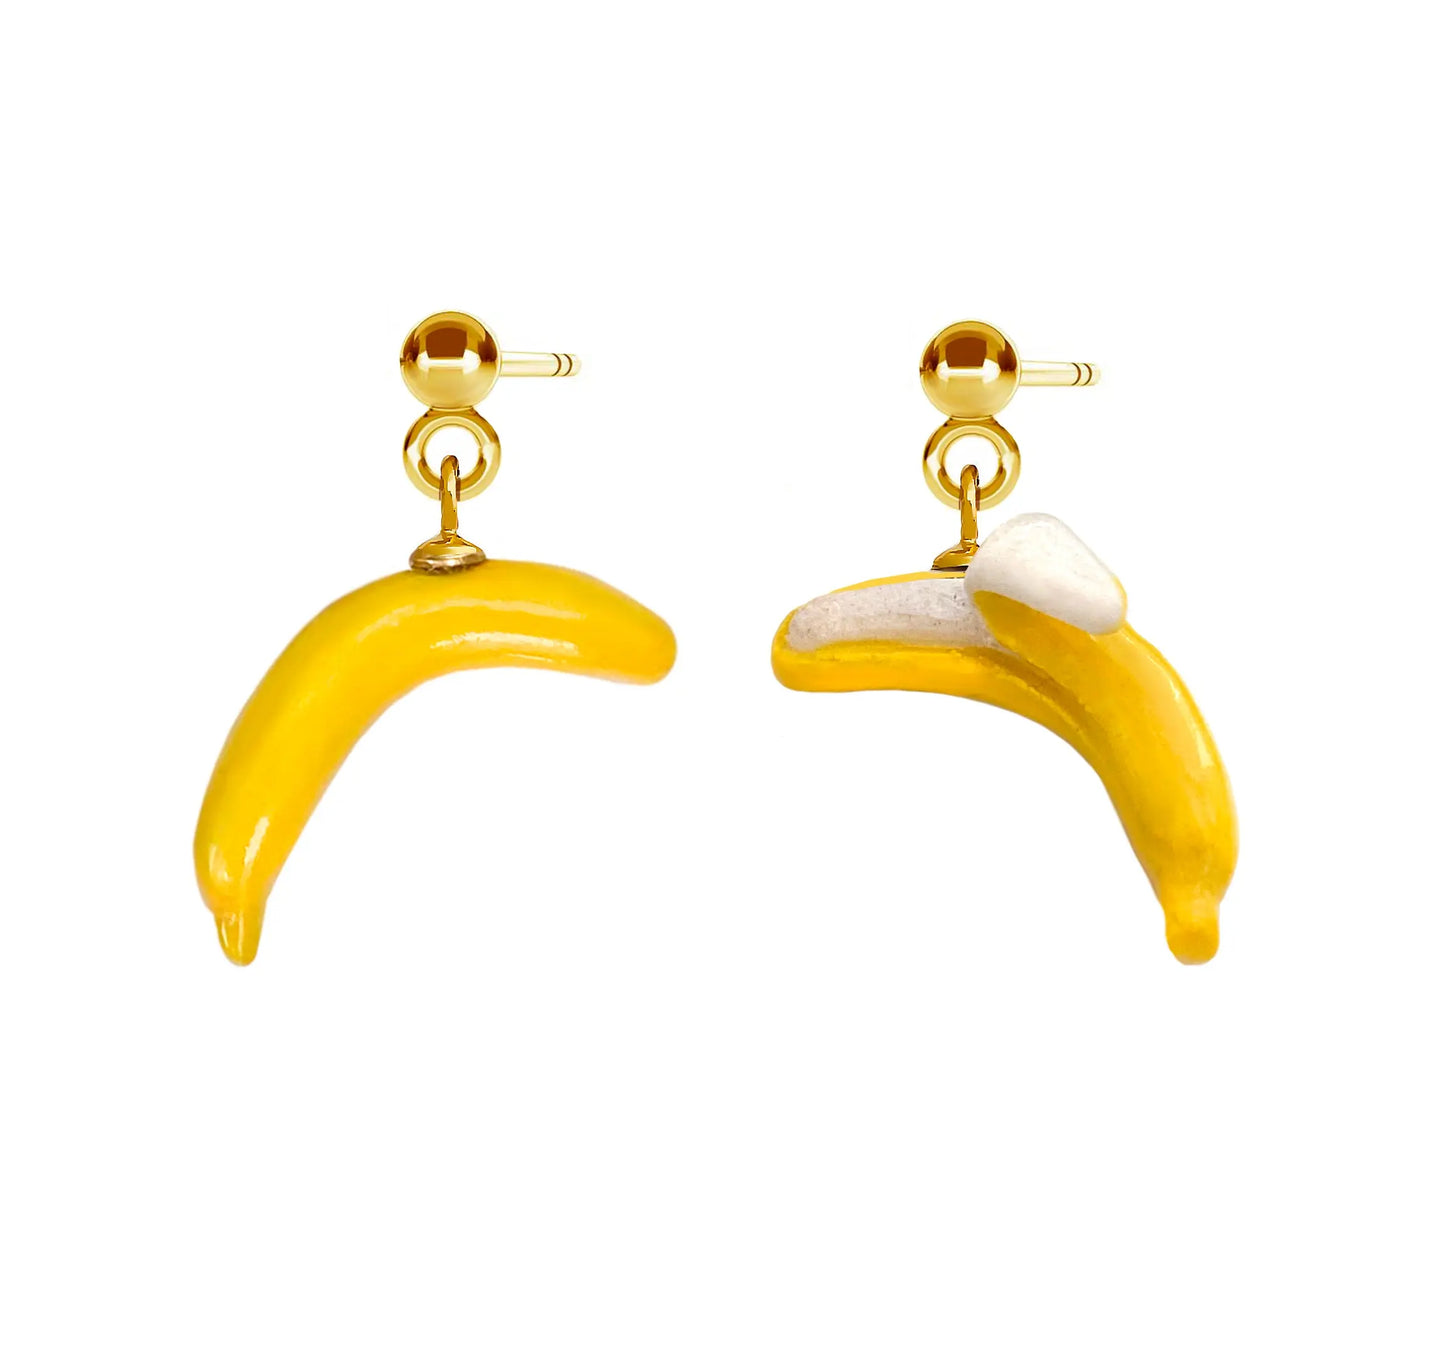 Handmade ceramic earrings with 24K gold-over 925 sterling silver details, featuring a banana-shaped design. Unique variations may occur.